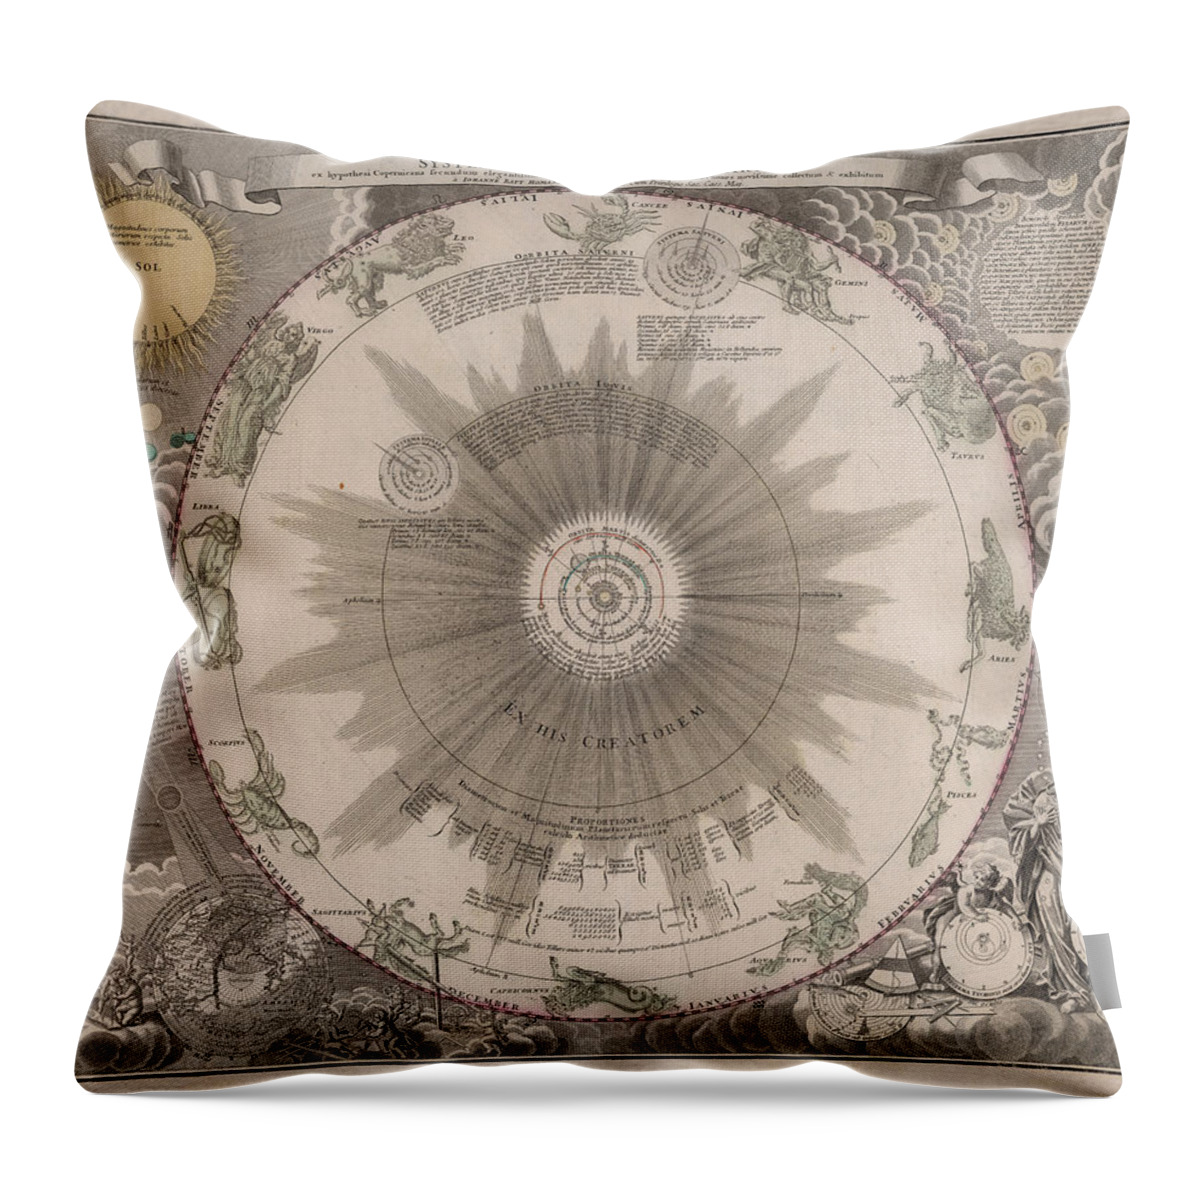 Celestial Chart Throw Pillow featuring the drawing The Solar System - The Planetary System - Copernicus Model - Astronomical Chart - Celestial Chart by Studio Grafiikka